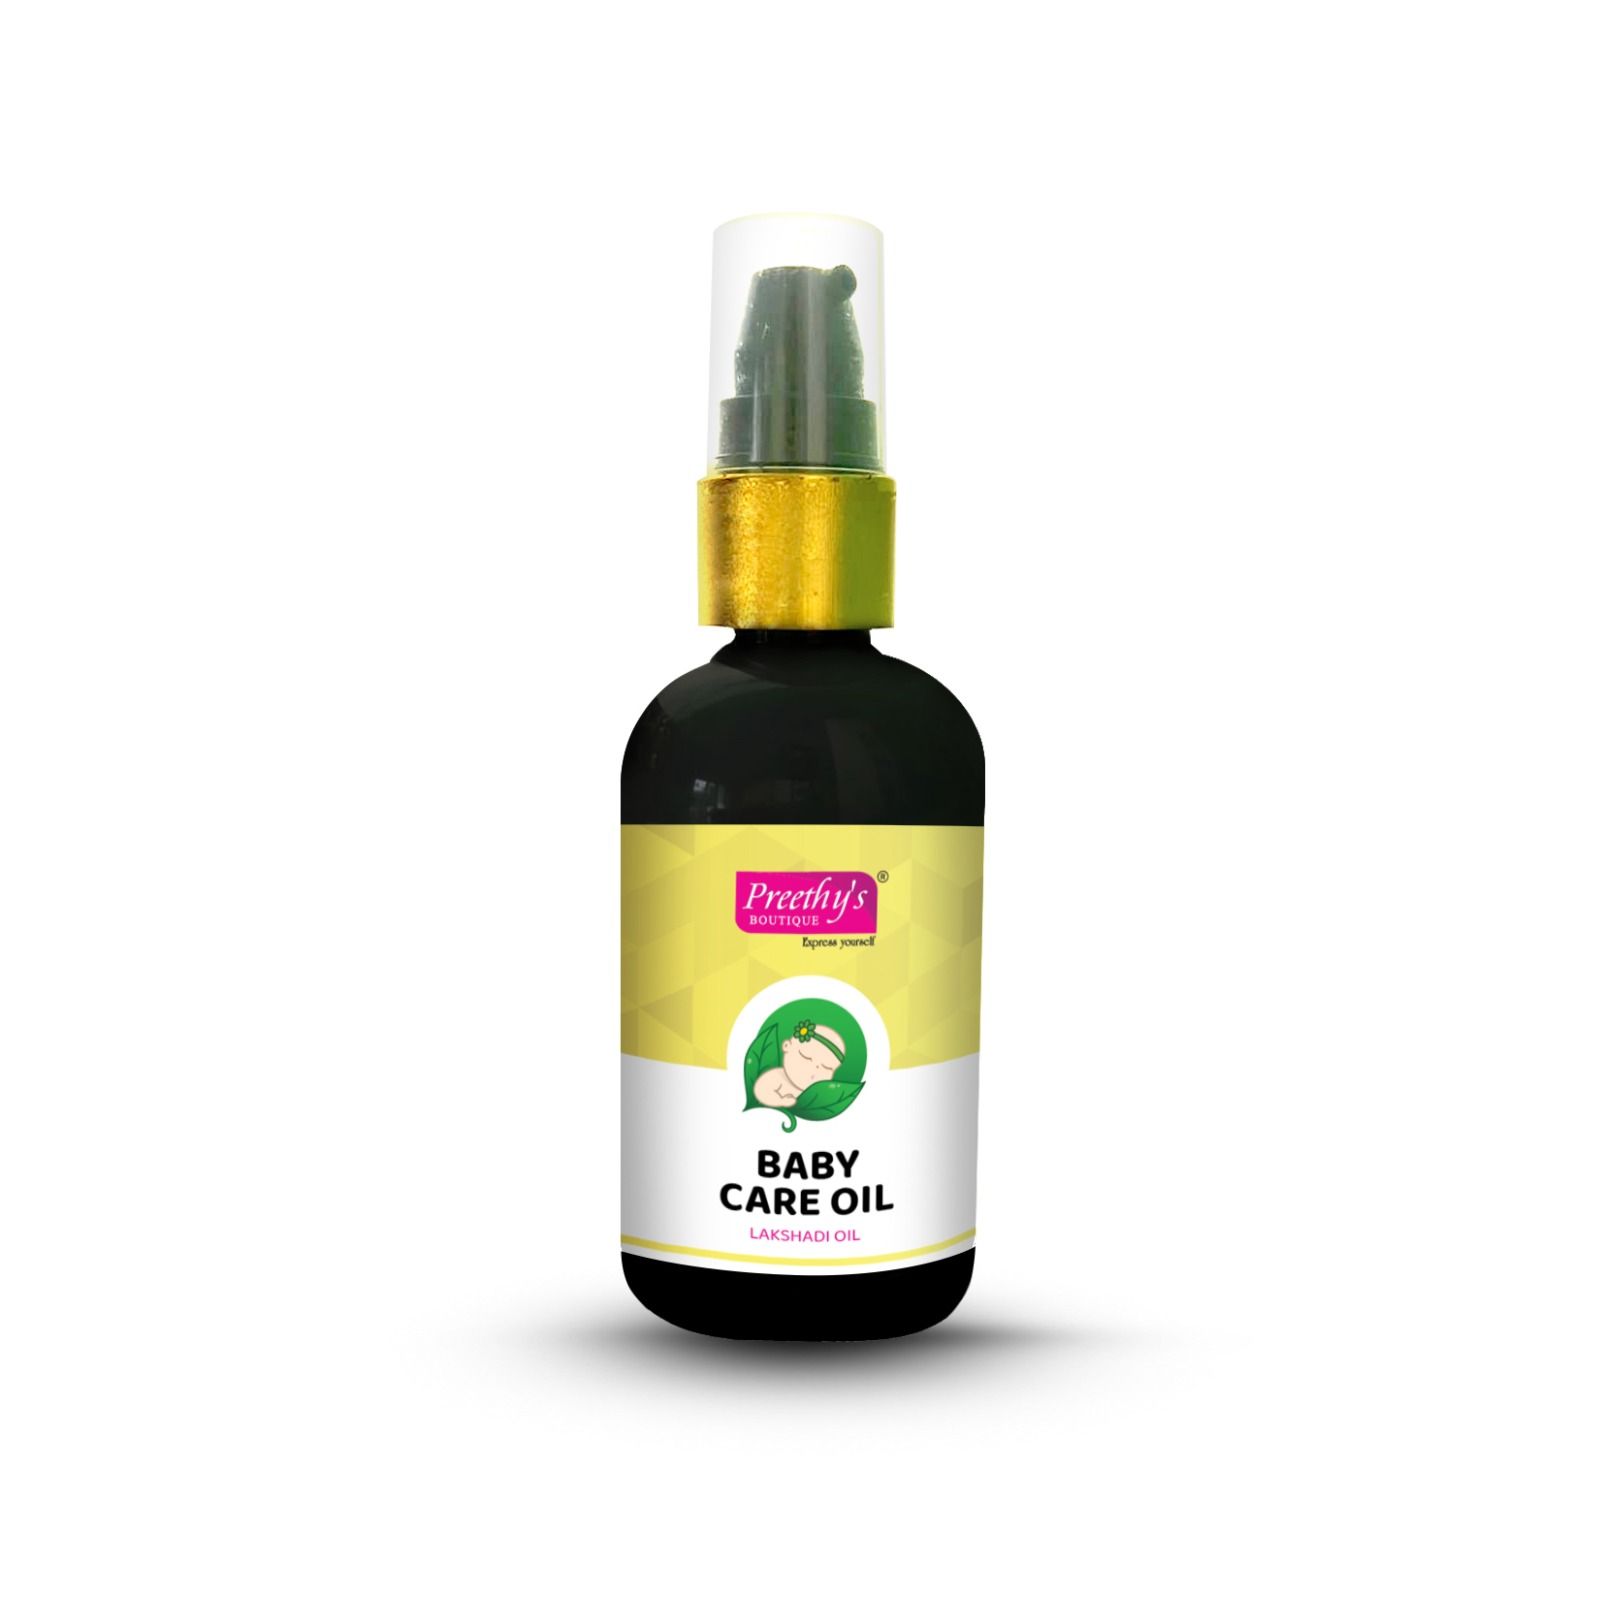 Buy Preethy's Boutique Baby Care Oil (Lakshadi Oil) at Best Price Online